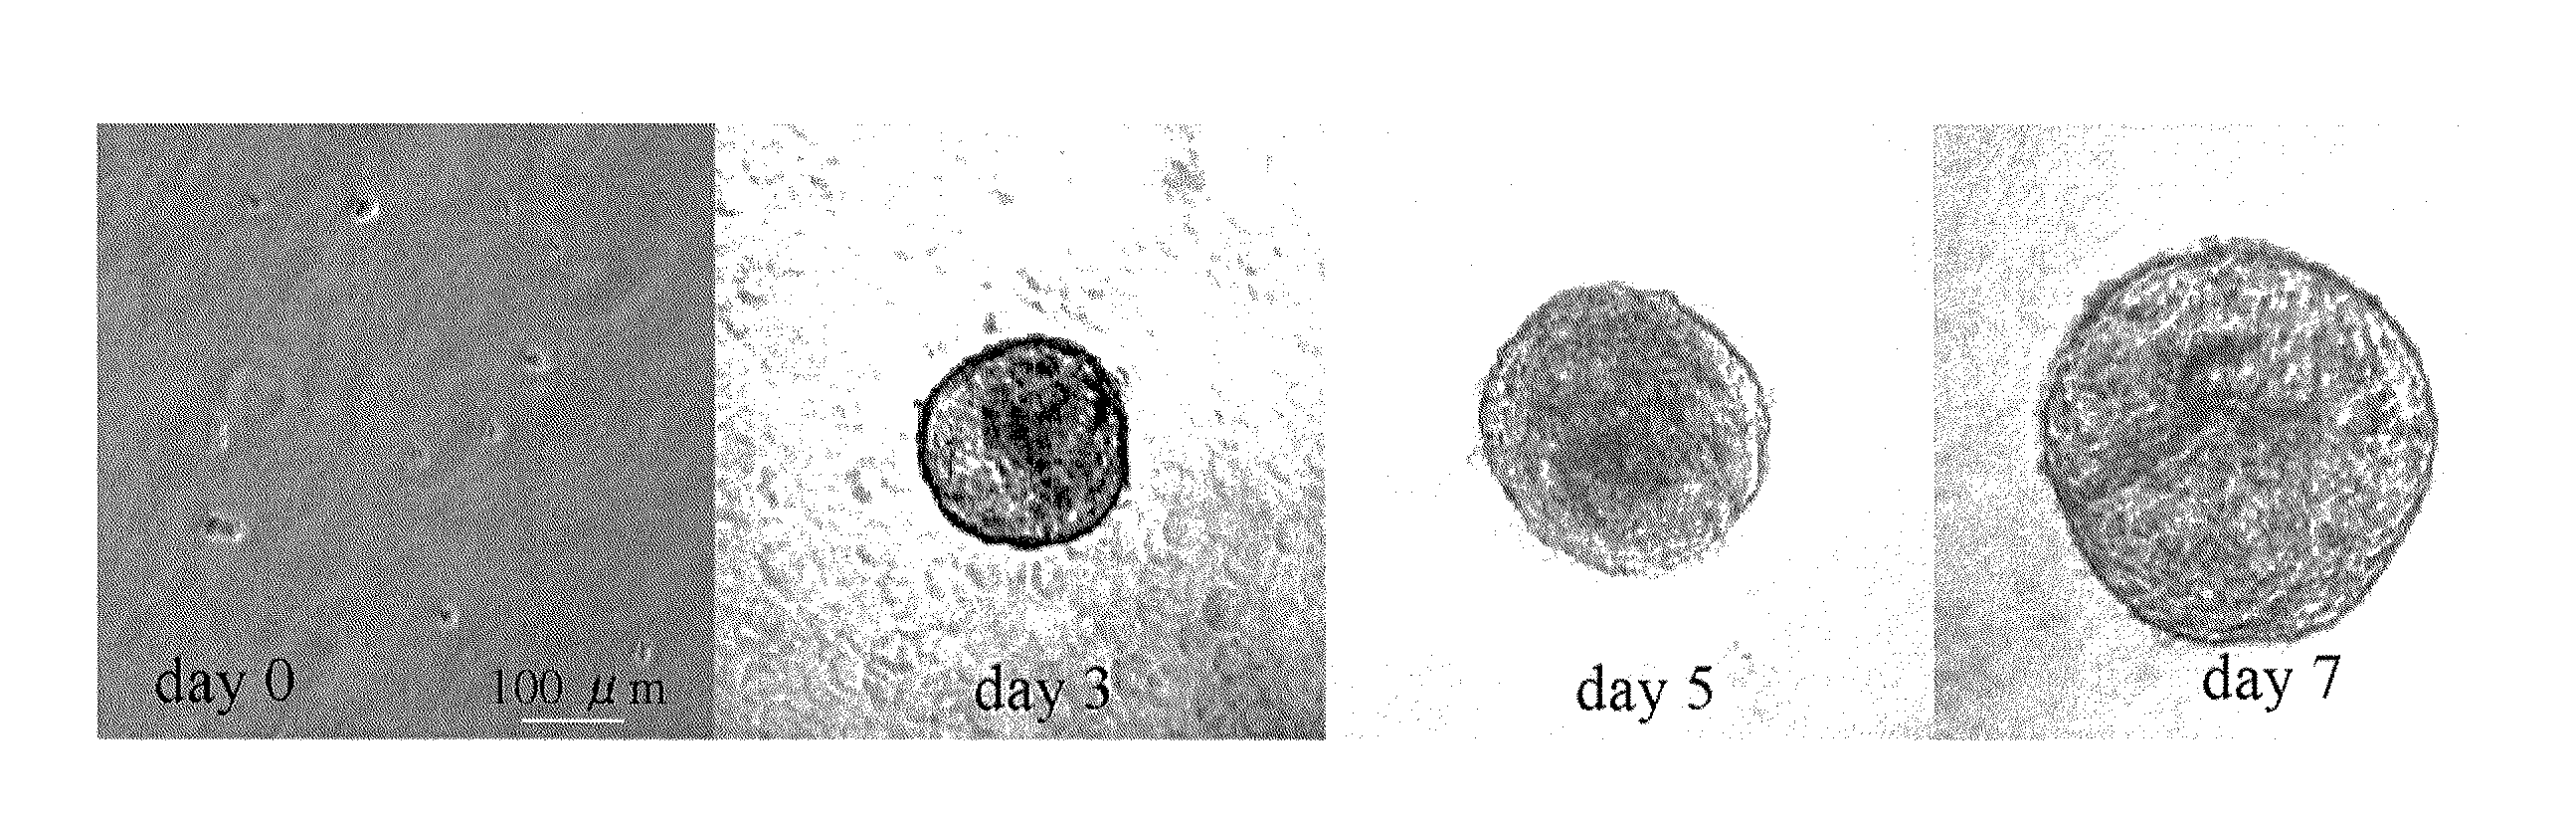 Human corneal endothelial cell-derived precursor cells, cellular aggregates, methods for manufacturing the same, and methods for transplanting precursor cells and cellular aggregates